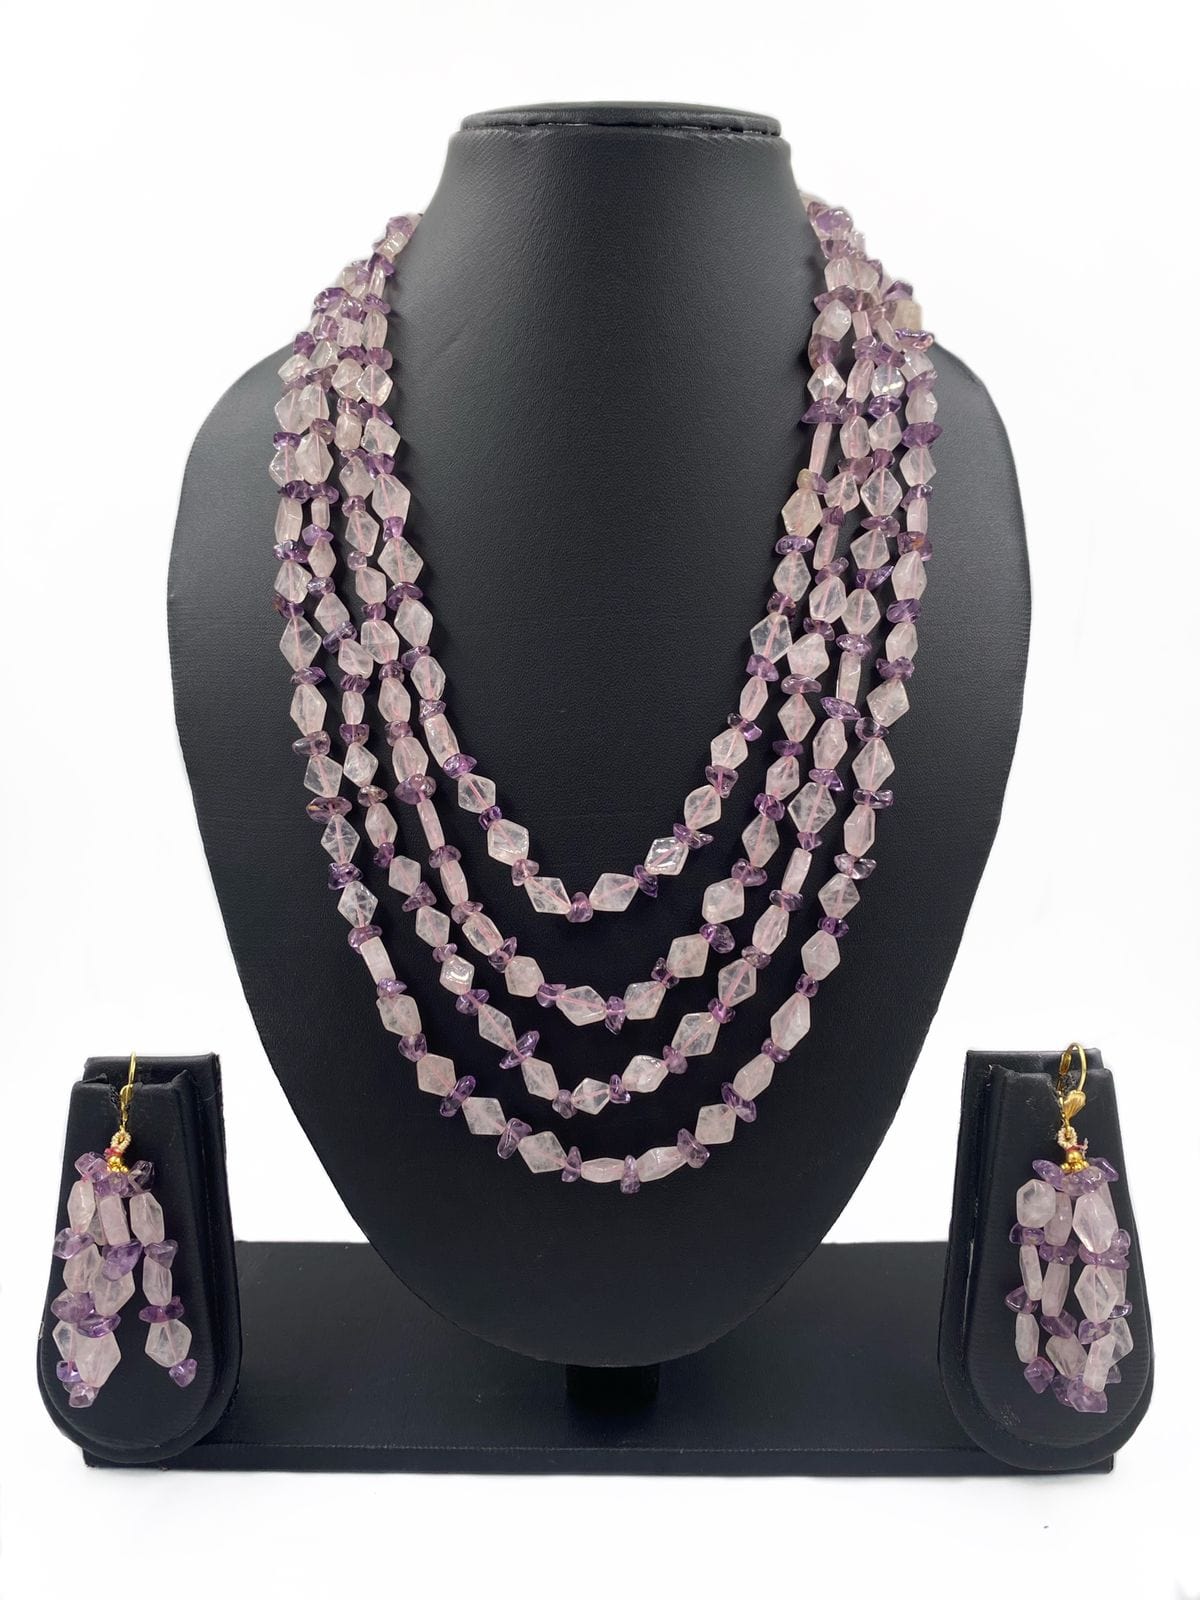 Handcrafted Multi Layered Semi Precious Rose Quartz And Amethyst Beads Necklace By Gehna Shop Beads Jewellery